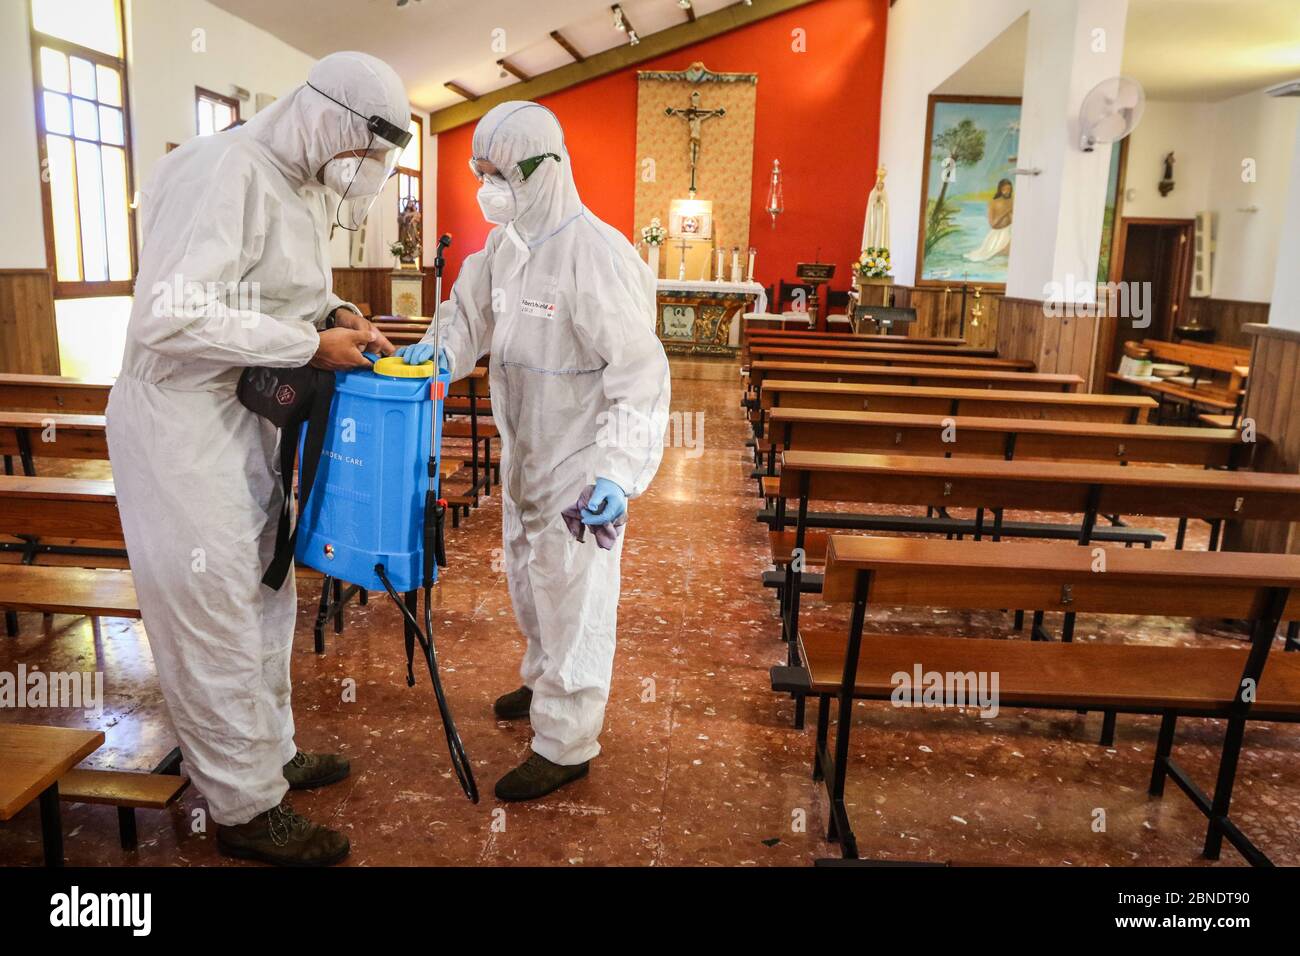 May 14, 2020: 14 May 2020 (Malaga) The disinfection company Fearral carries out cleaning and disinfection work in the Church of Santa MarÃ-a Inmaculada in Torre de BenagalbÃ³n del RincÃ³n de la Victoria altruistically due to the coronavirus crisis Credit: Lorenzo Carnero/ZUMA Wire/Alamy Live News Stock Photo